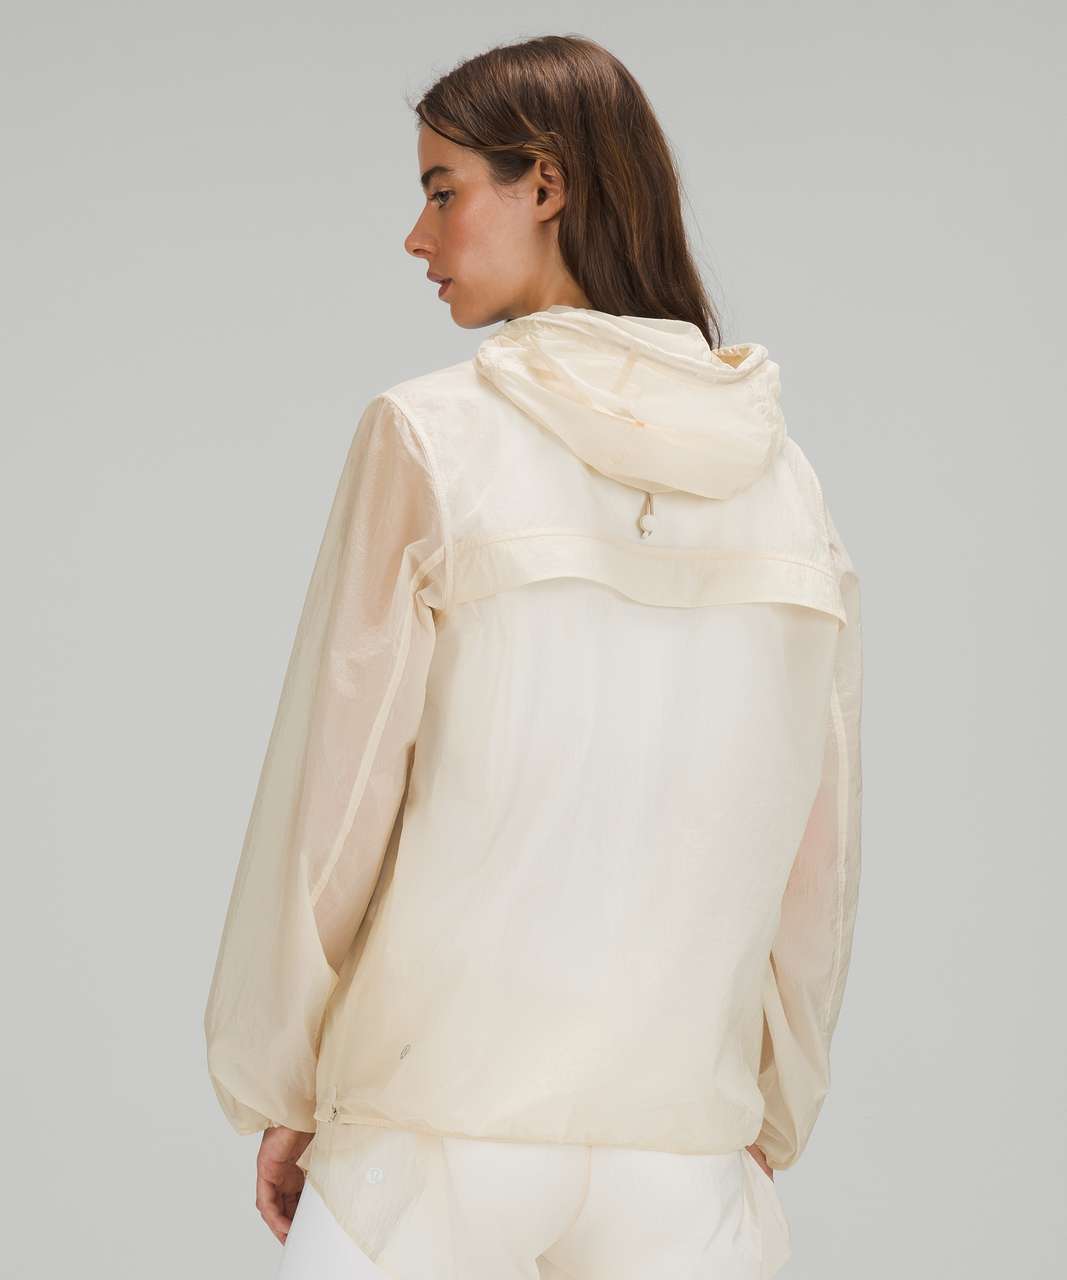 Lululemon Step Out Anorak - White Opal